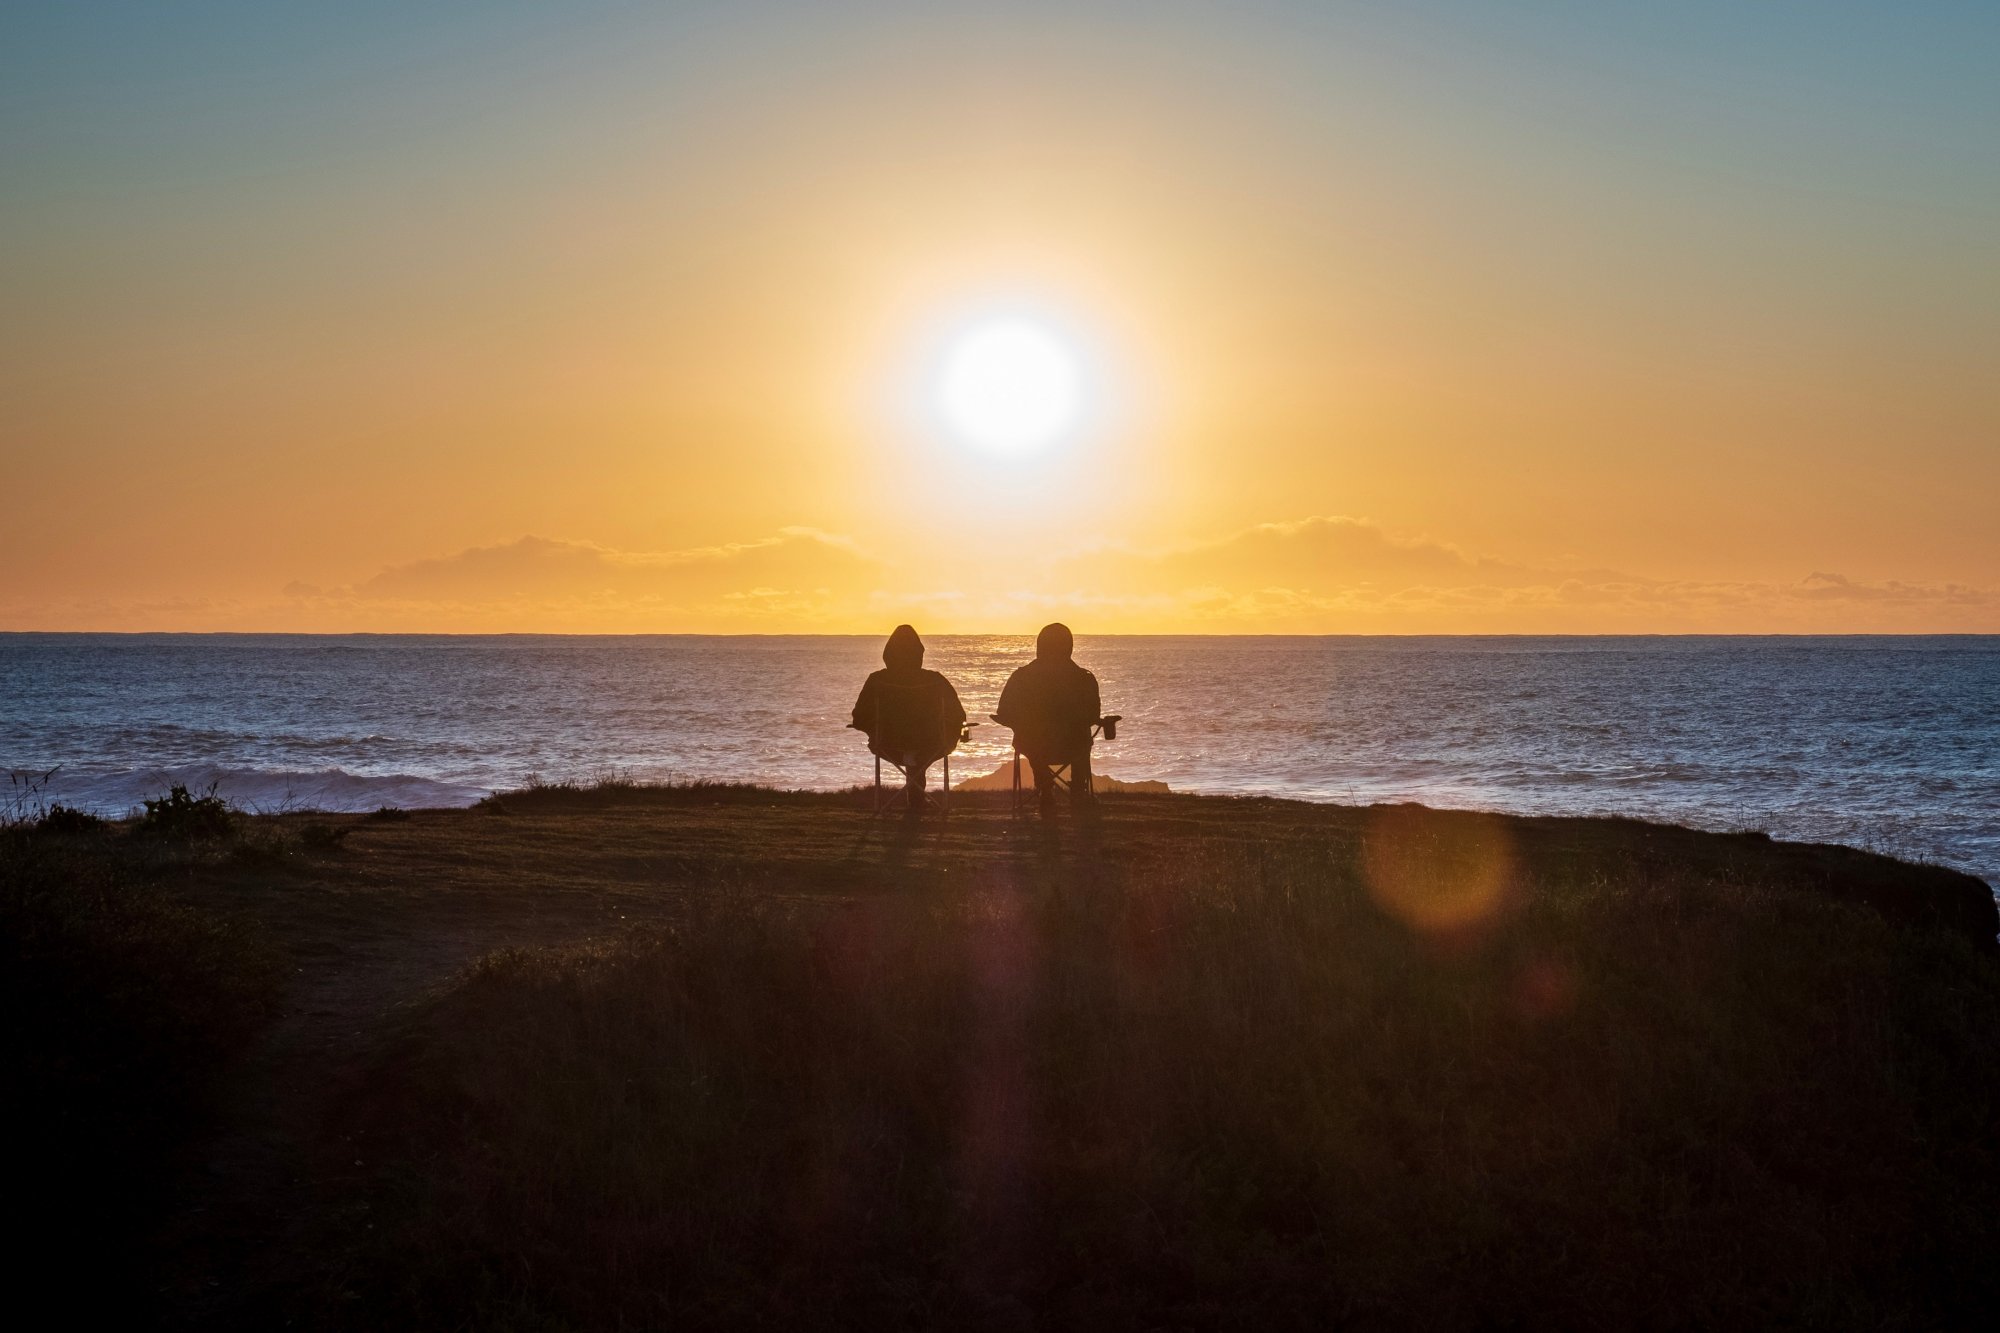 Marlston Forrest helped these two people to relax in retirement, beach at sunset.